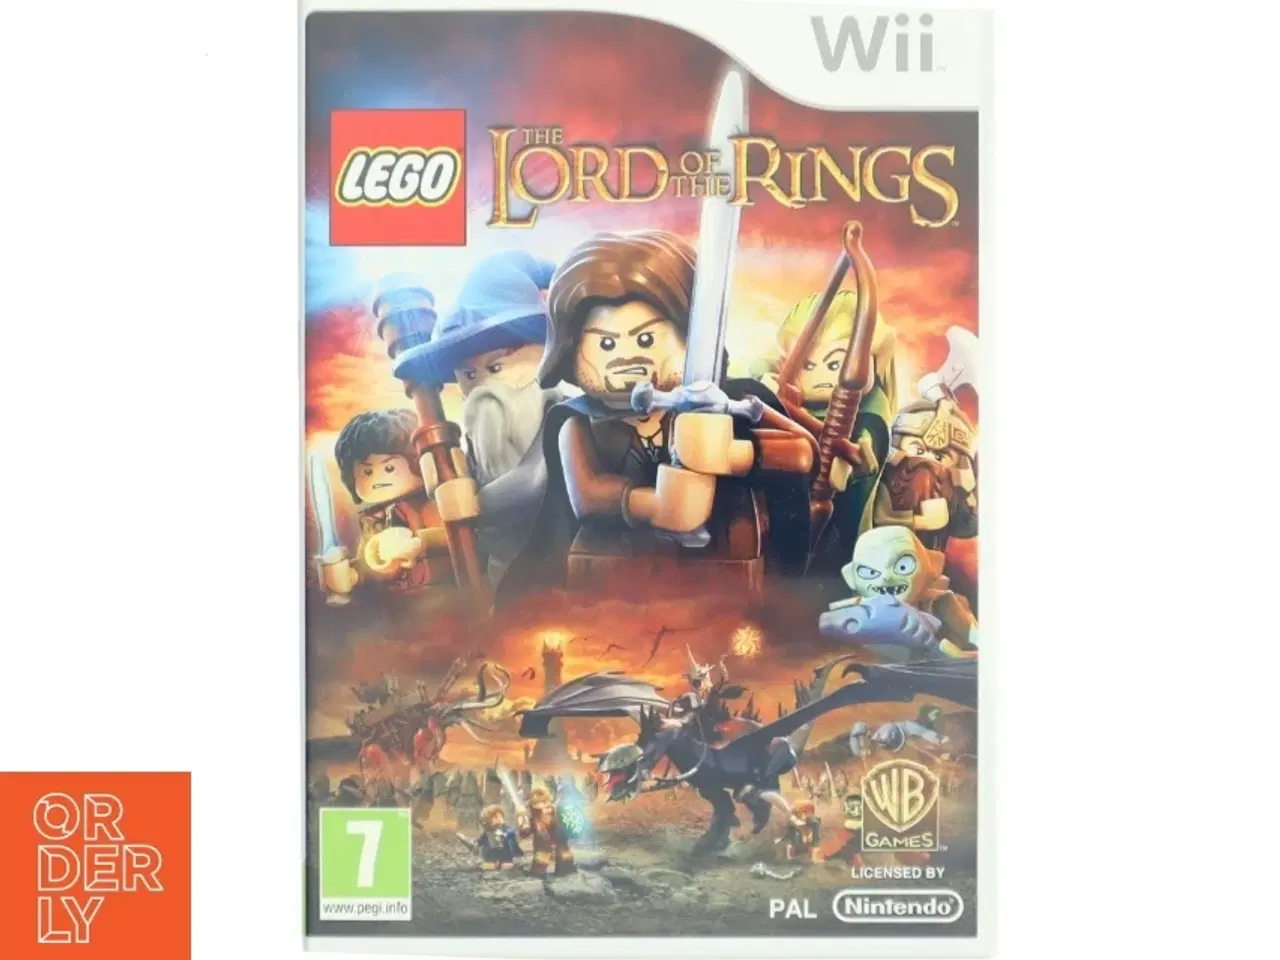 Billede 1 - LEGO: The Lord of the Rings Wii Spil fra Nintendo, LEGO